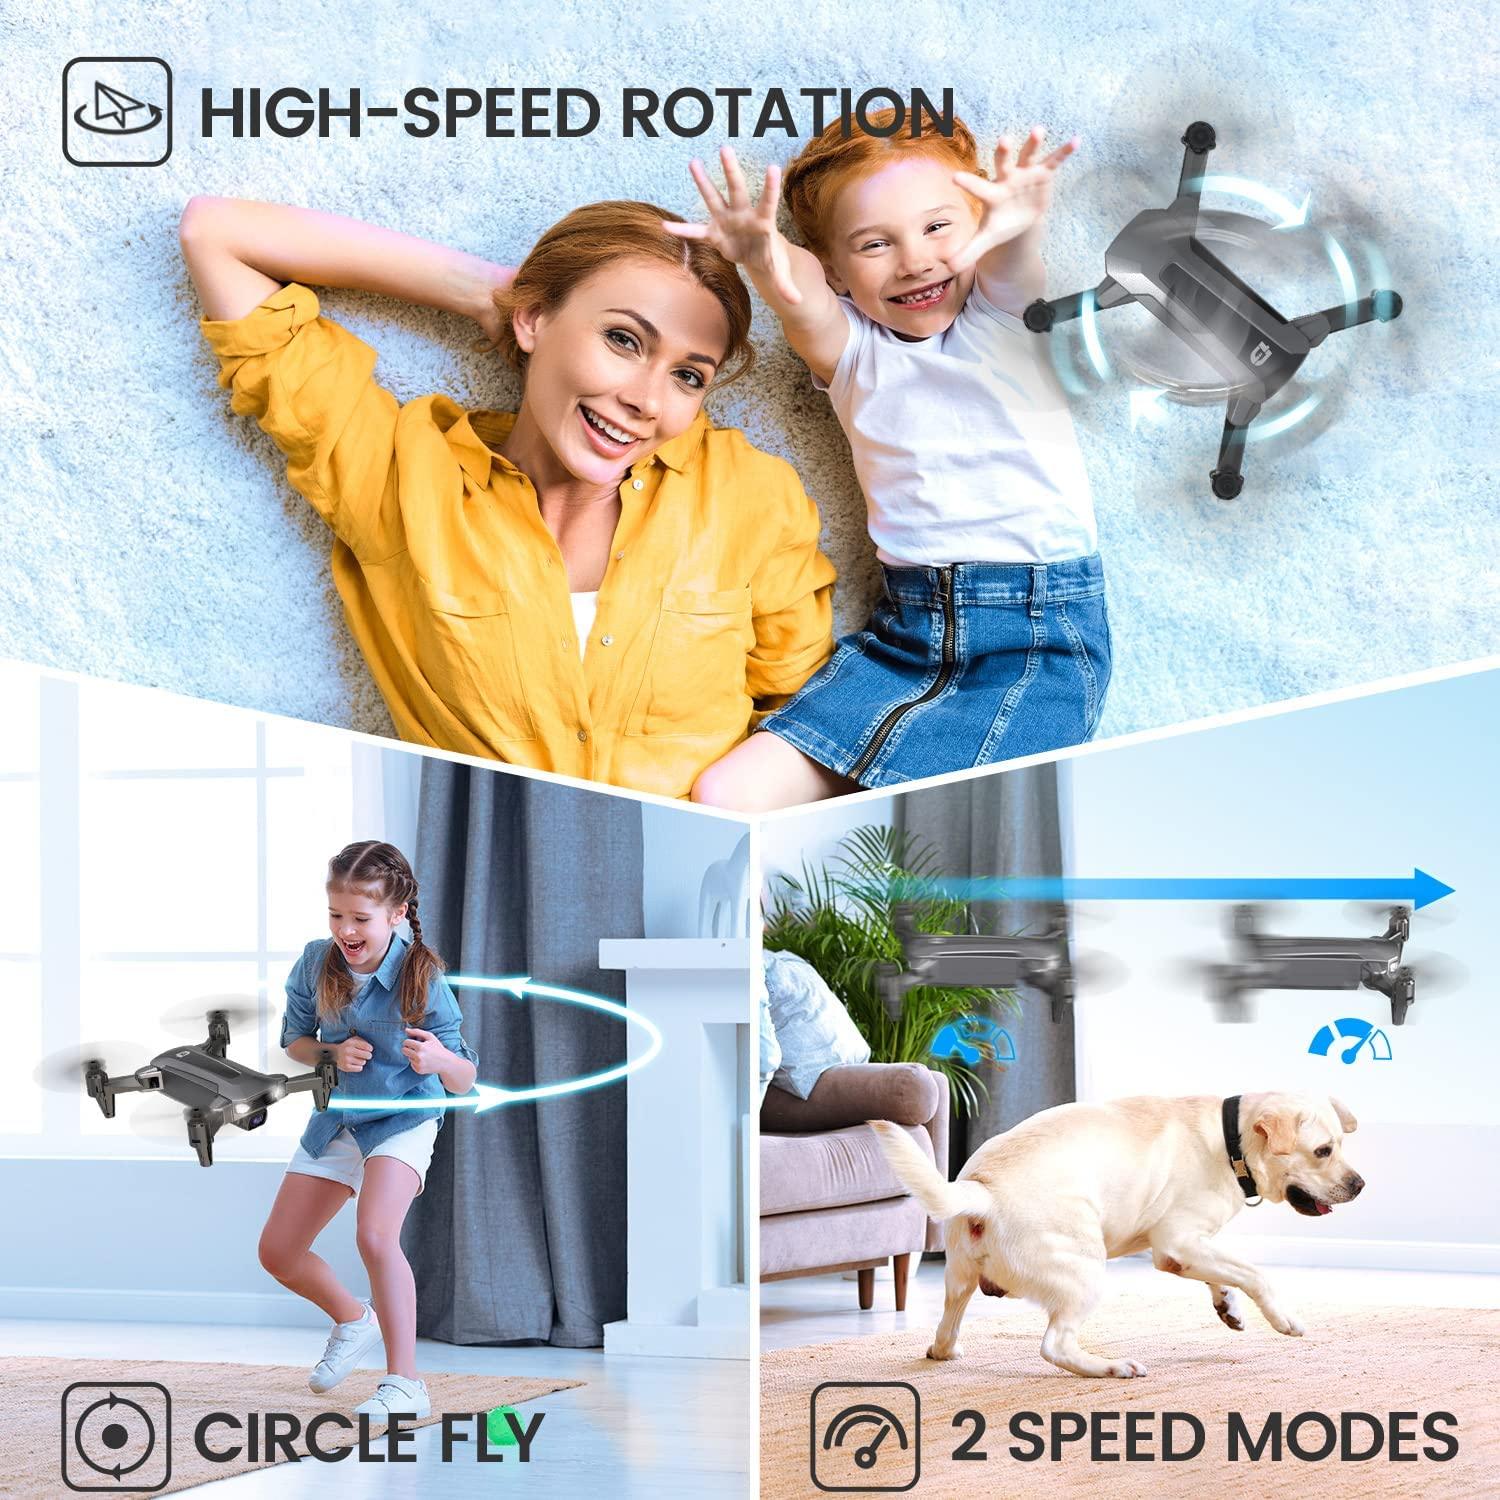 DEERC D40 Drone - FPV HD 1080P Mini Drones for Adults Kids Beginner, Foldable Quad Air Hobby RC Quadcopters & Multirotors, Toys Gifts, 2 Batteries 20 Mins Flight Time, Easy to Fly - RCDrone